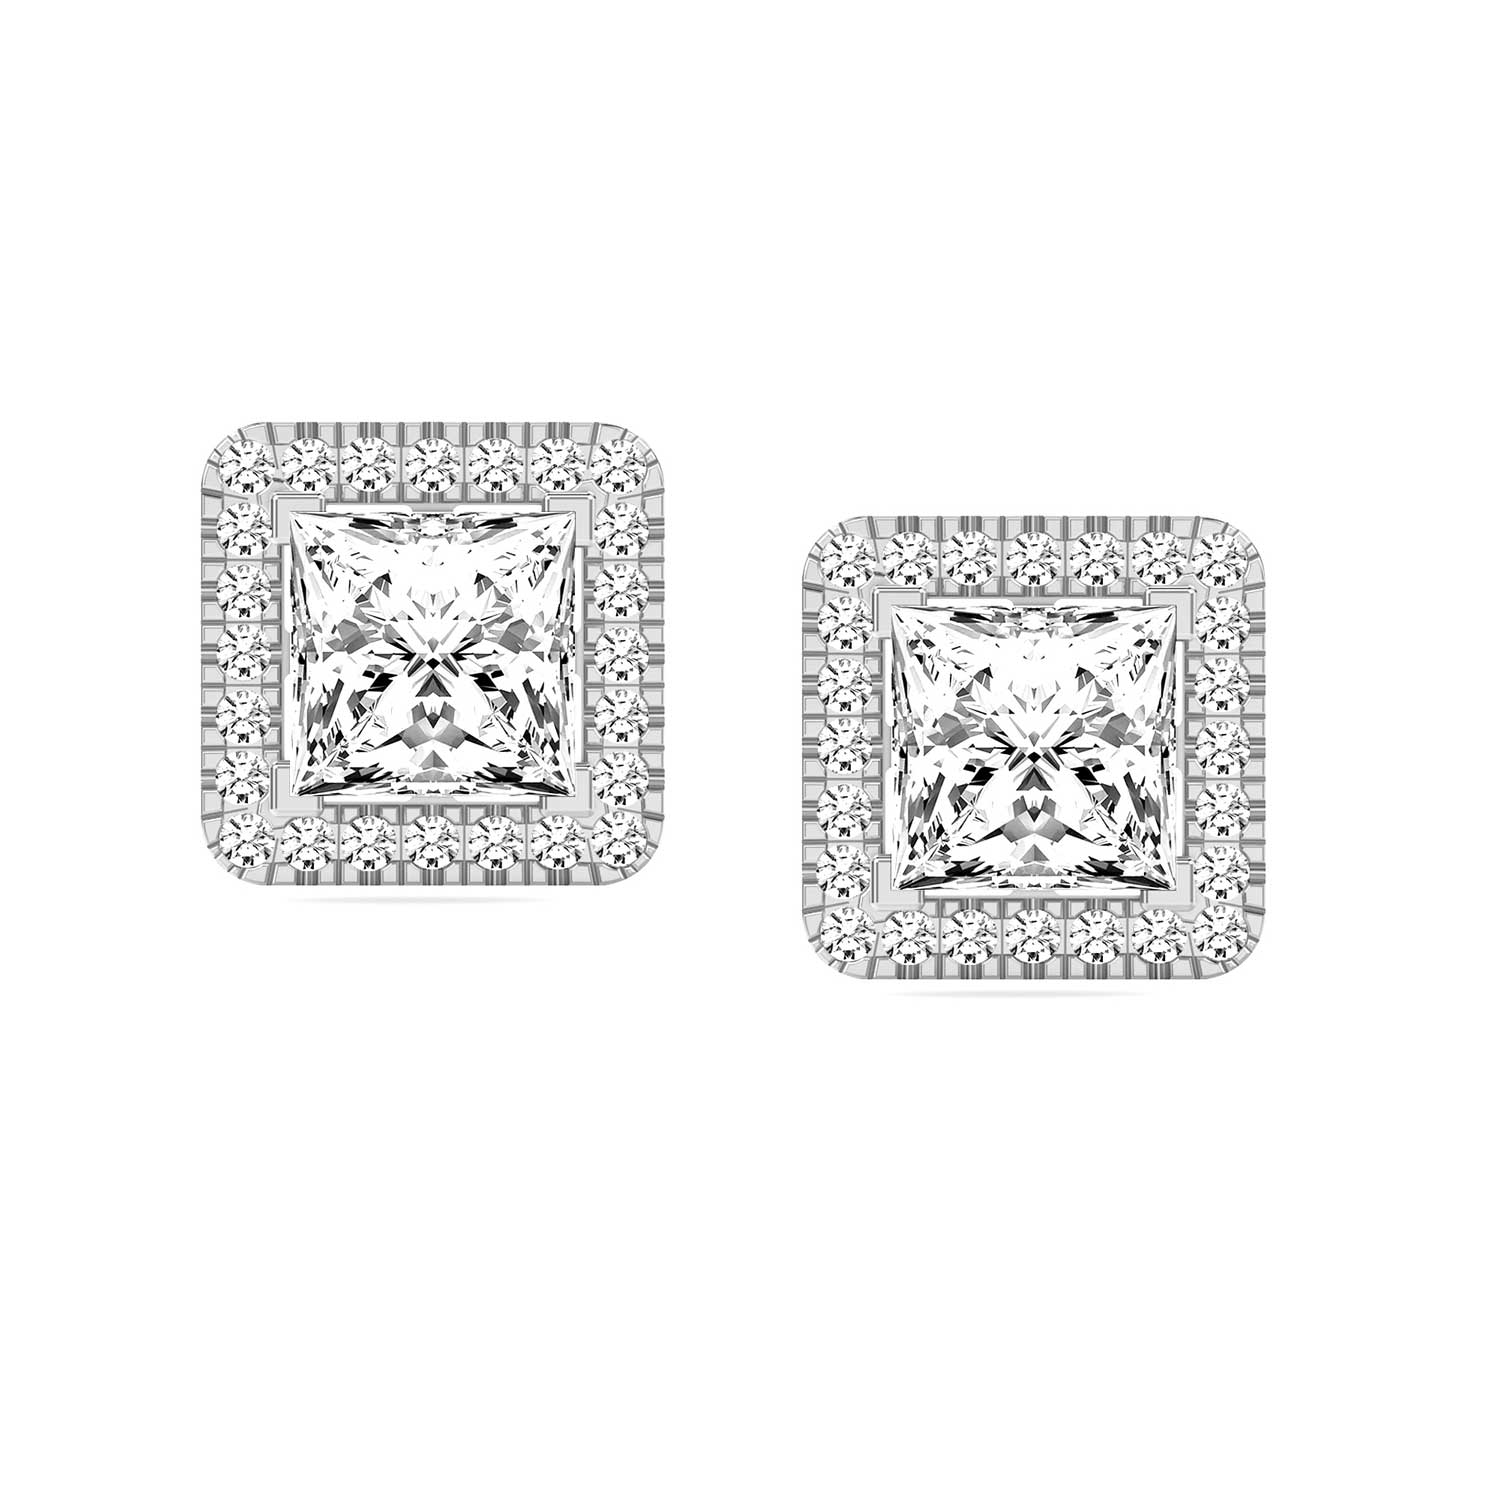 925 Sterling Silver Cubic Zirconia Lightweight Classic Geometric Square Micro Pave Stud Earrings for Women